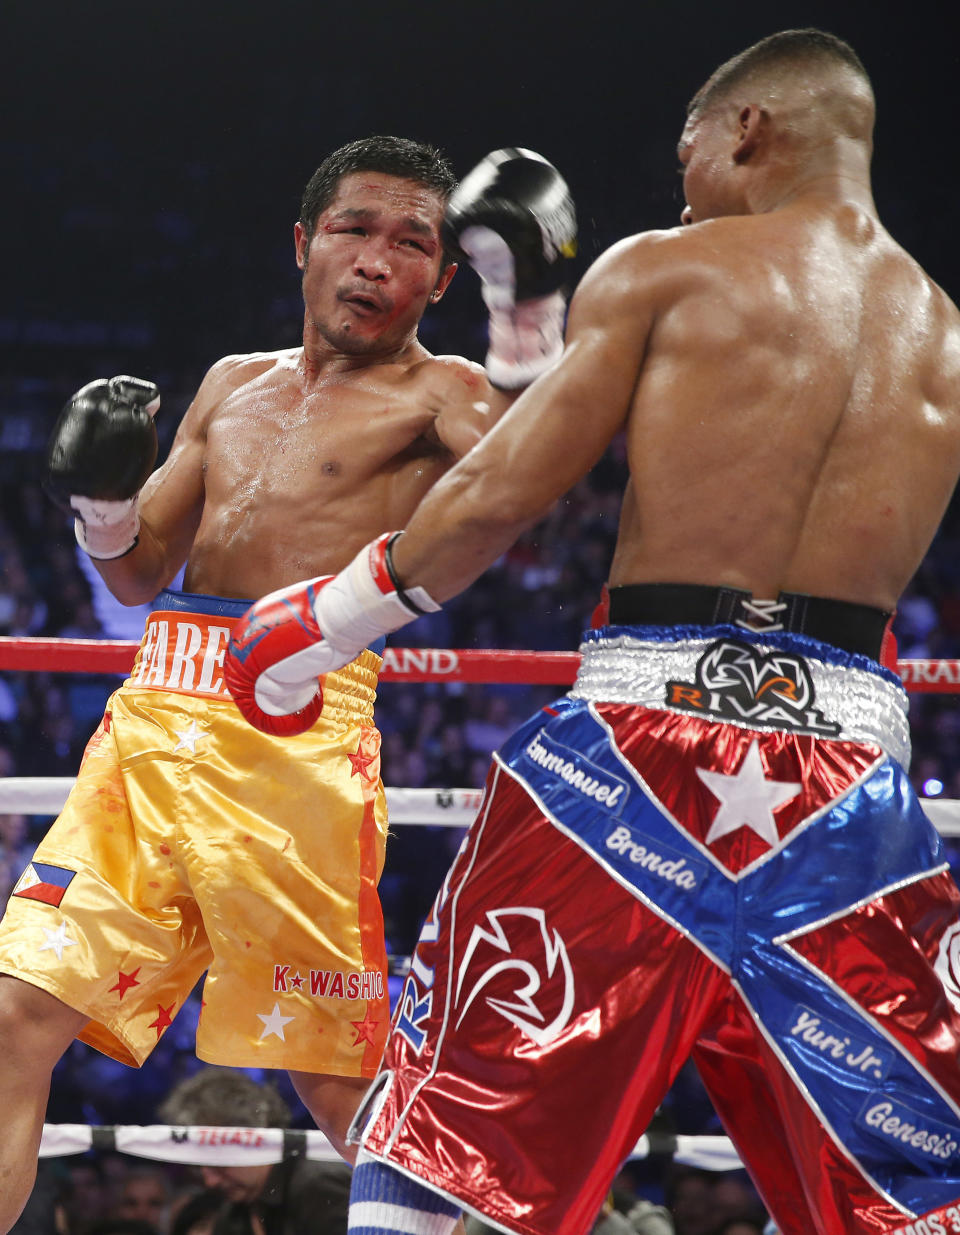 Yuriorkis Gamboa, from Miami, Fla., right, and Michael Farenas, from the Philippines, trade blows during their WBA interim super featherweight title fight Saturday, Dec. 8, 2012, in Las Vegas. (AP Photo/Eric Jamison)